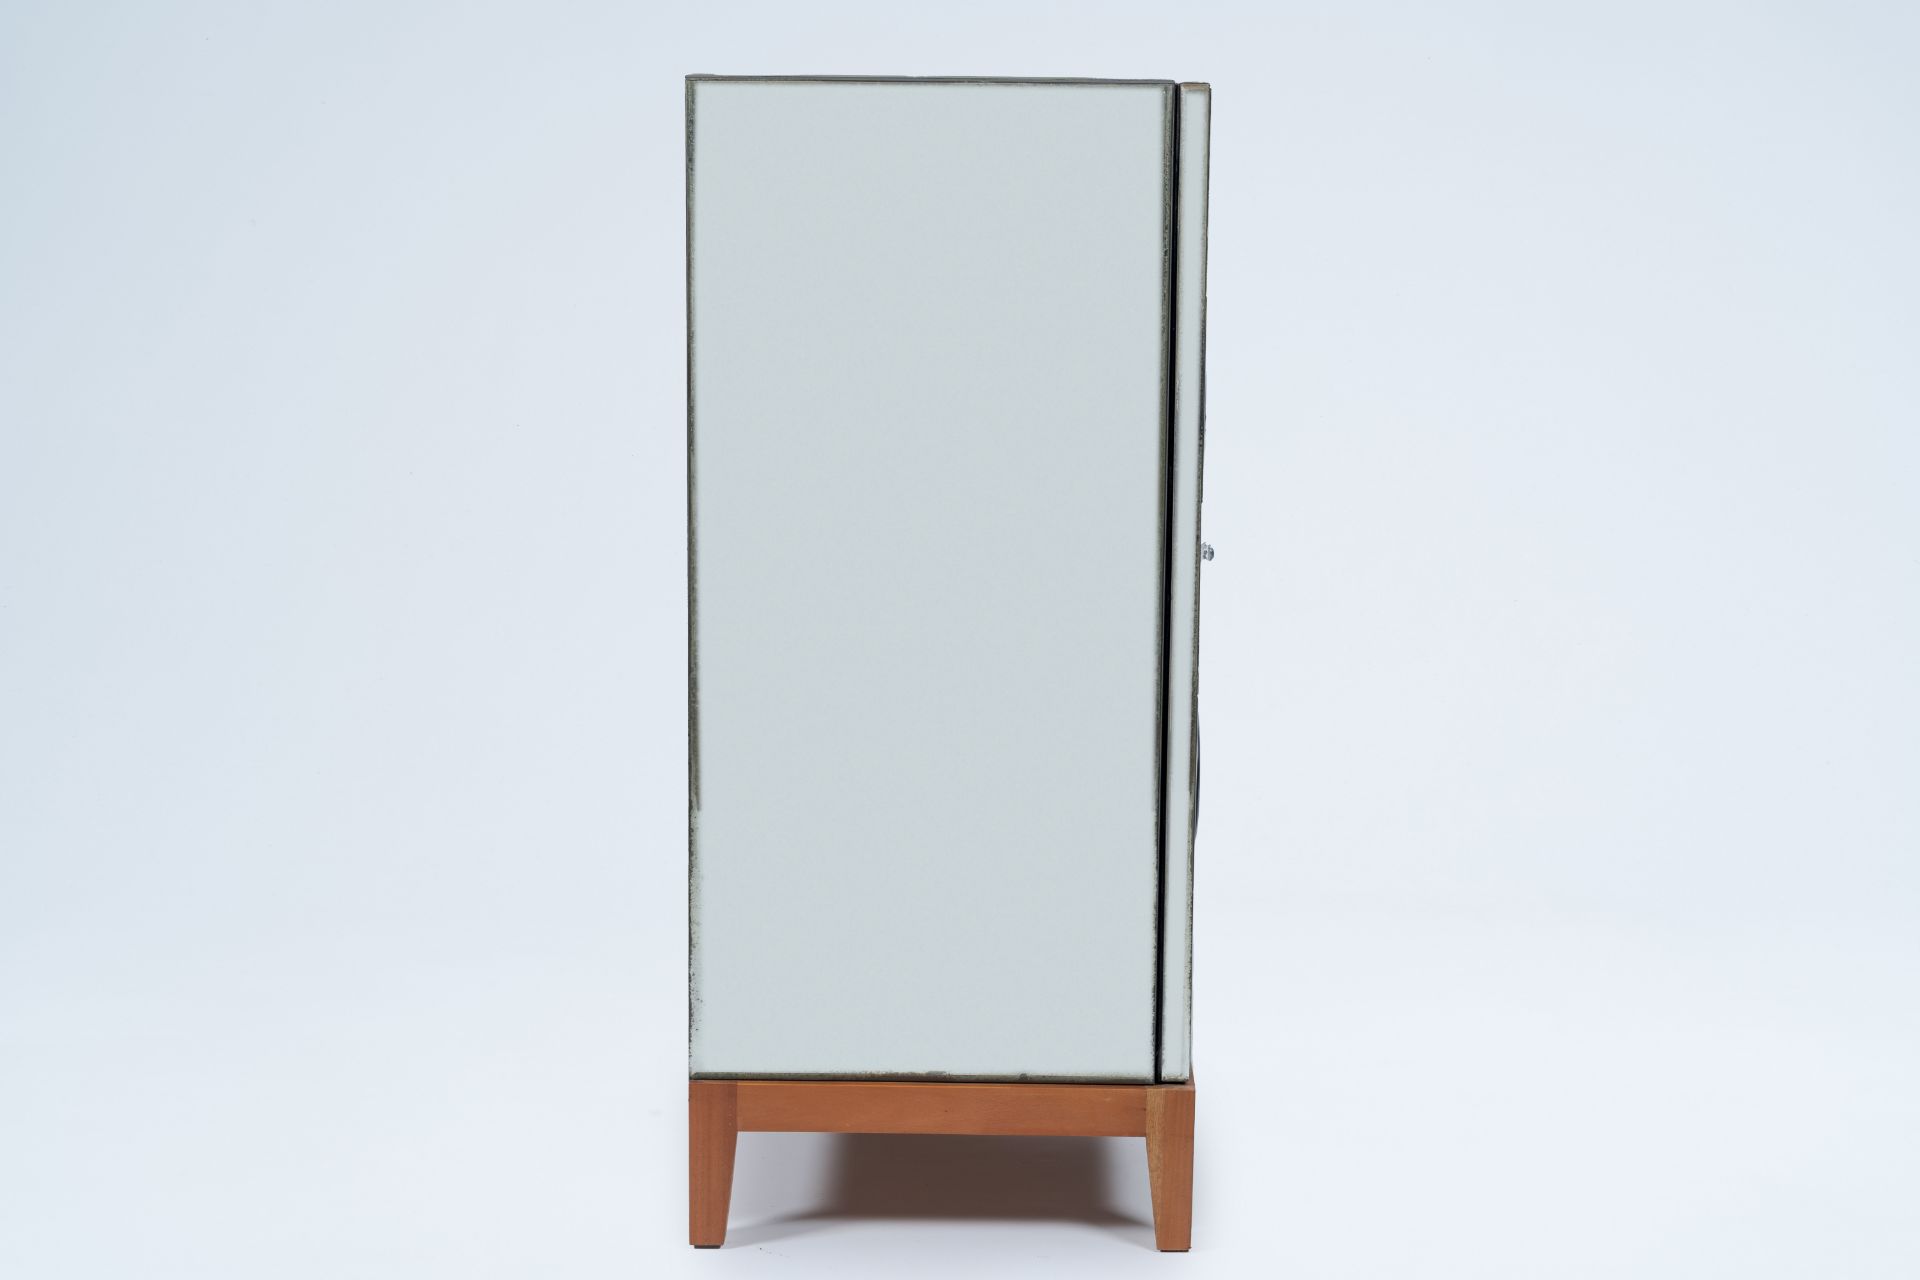 Olivier De Schrijver (1958): A 'Special Olivier' two-door cabinet with antique glass and lined with - Image 6 of 7